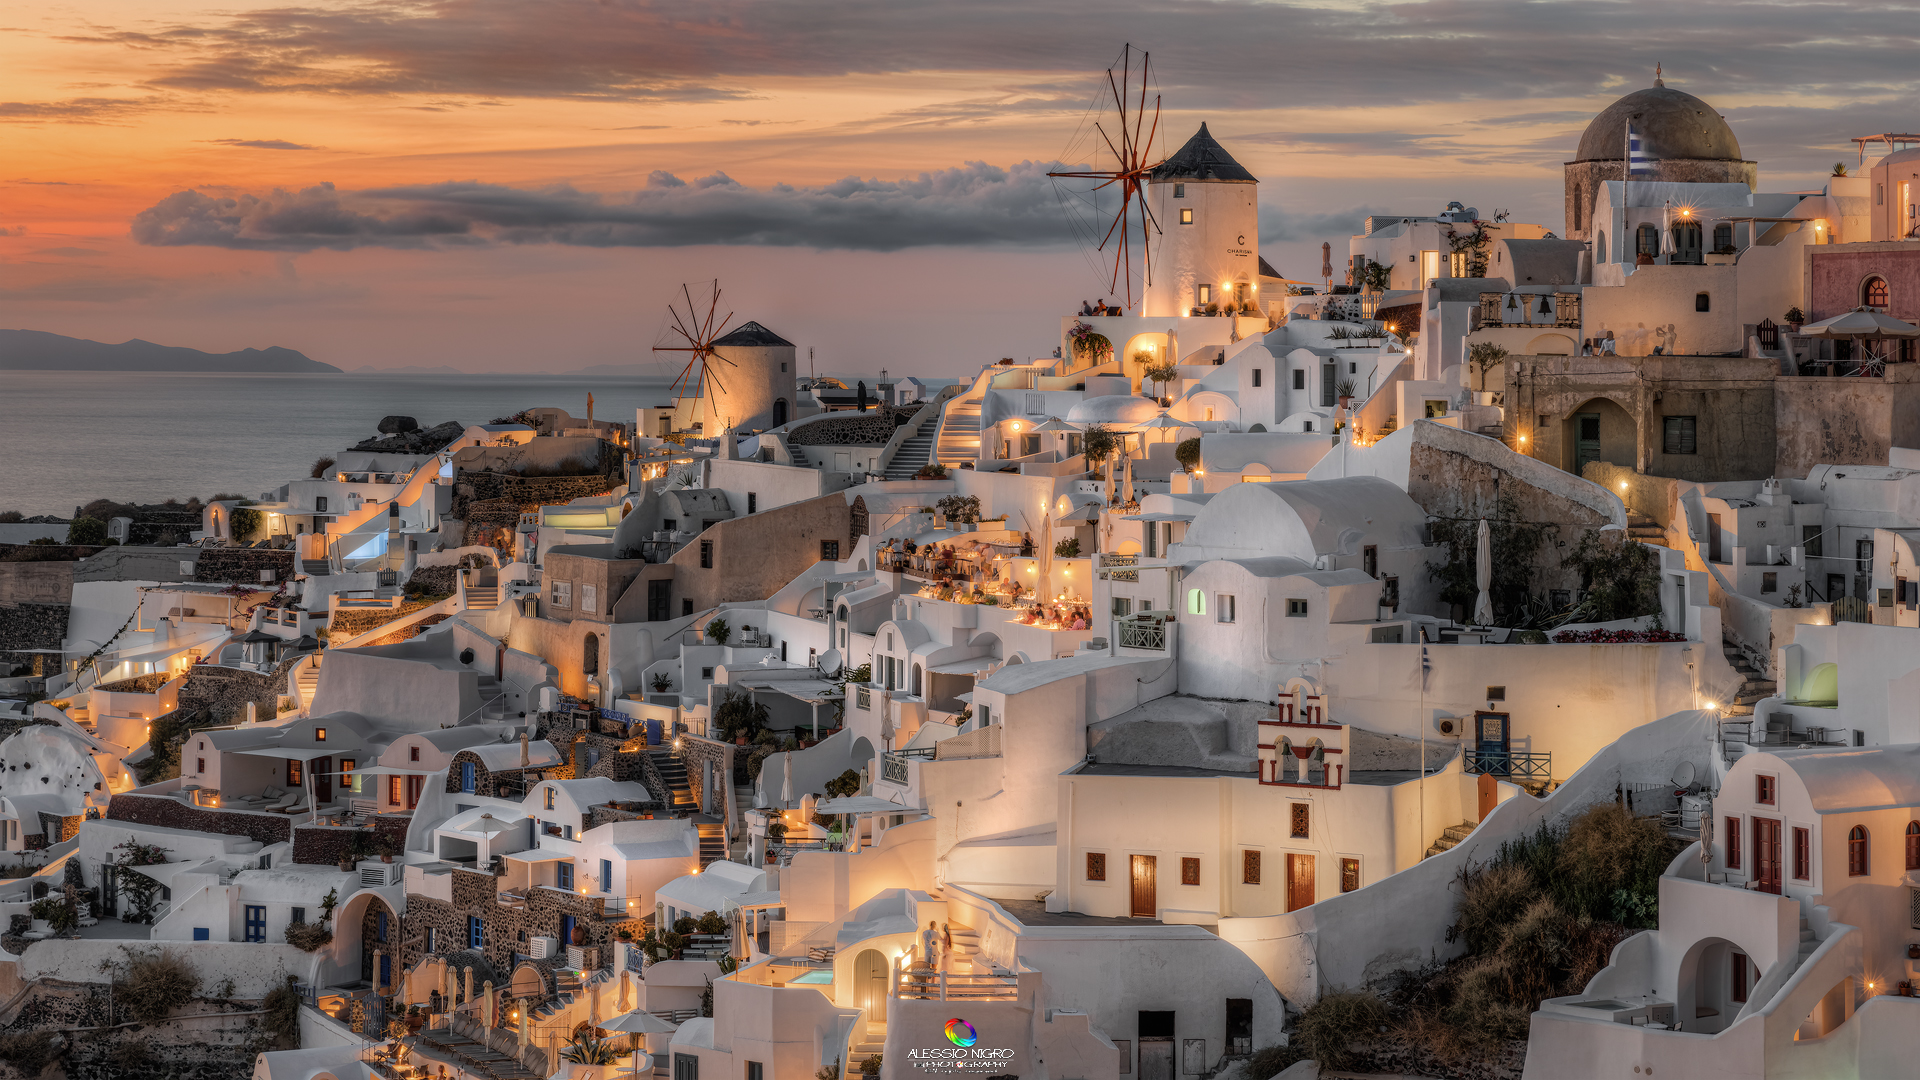 Oia at sunset...